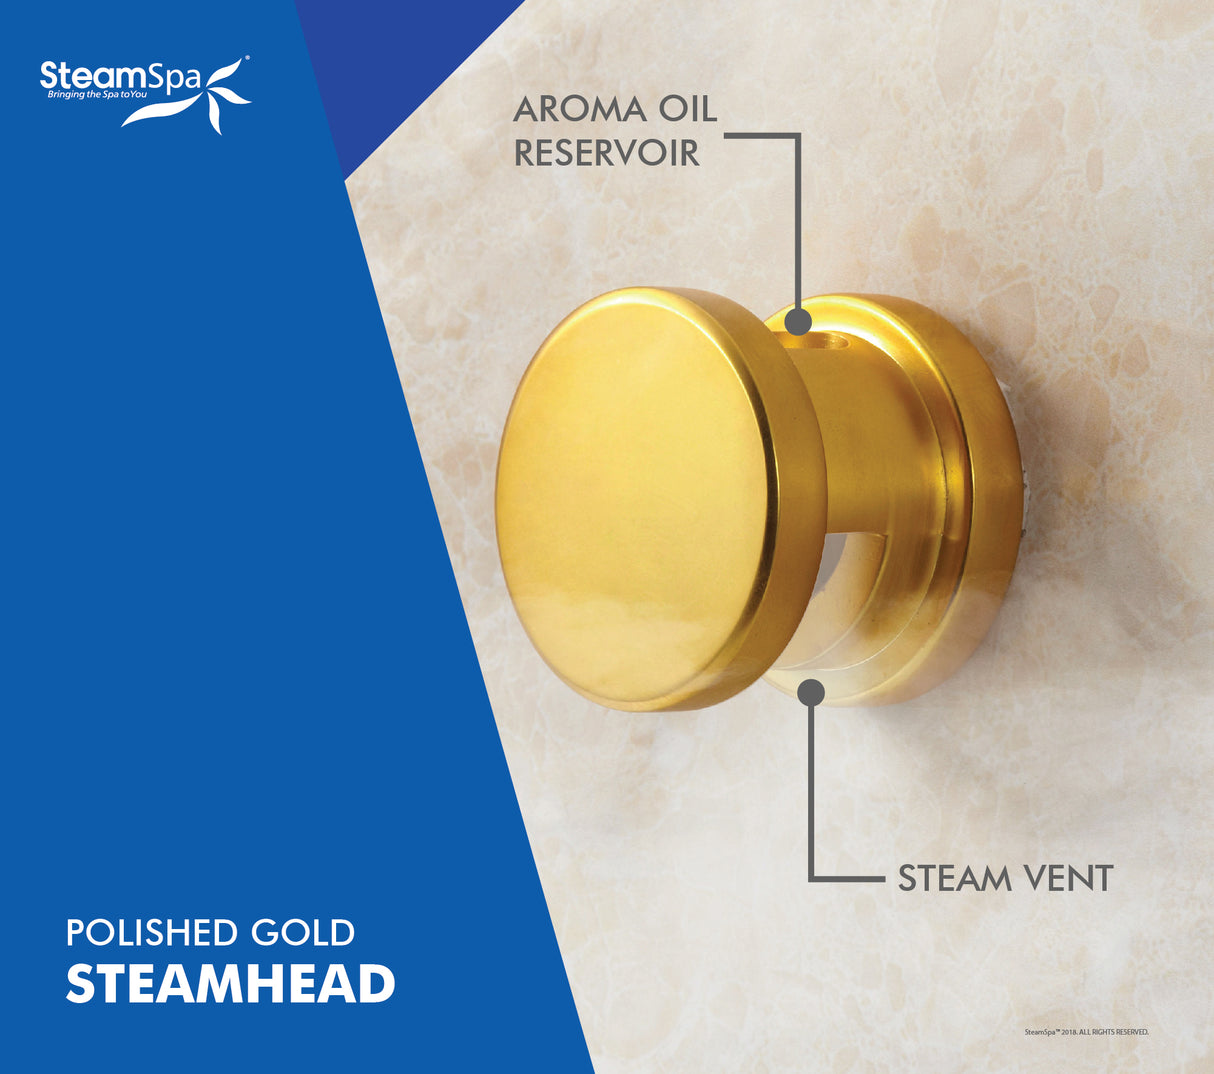 SteamSpa Indulgence 9 KW QuickStart Acu-Steam Bath Generator Package in Polished Gold IN900GD